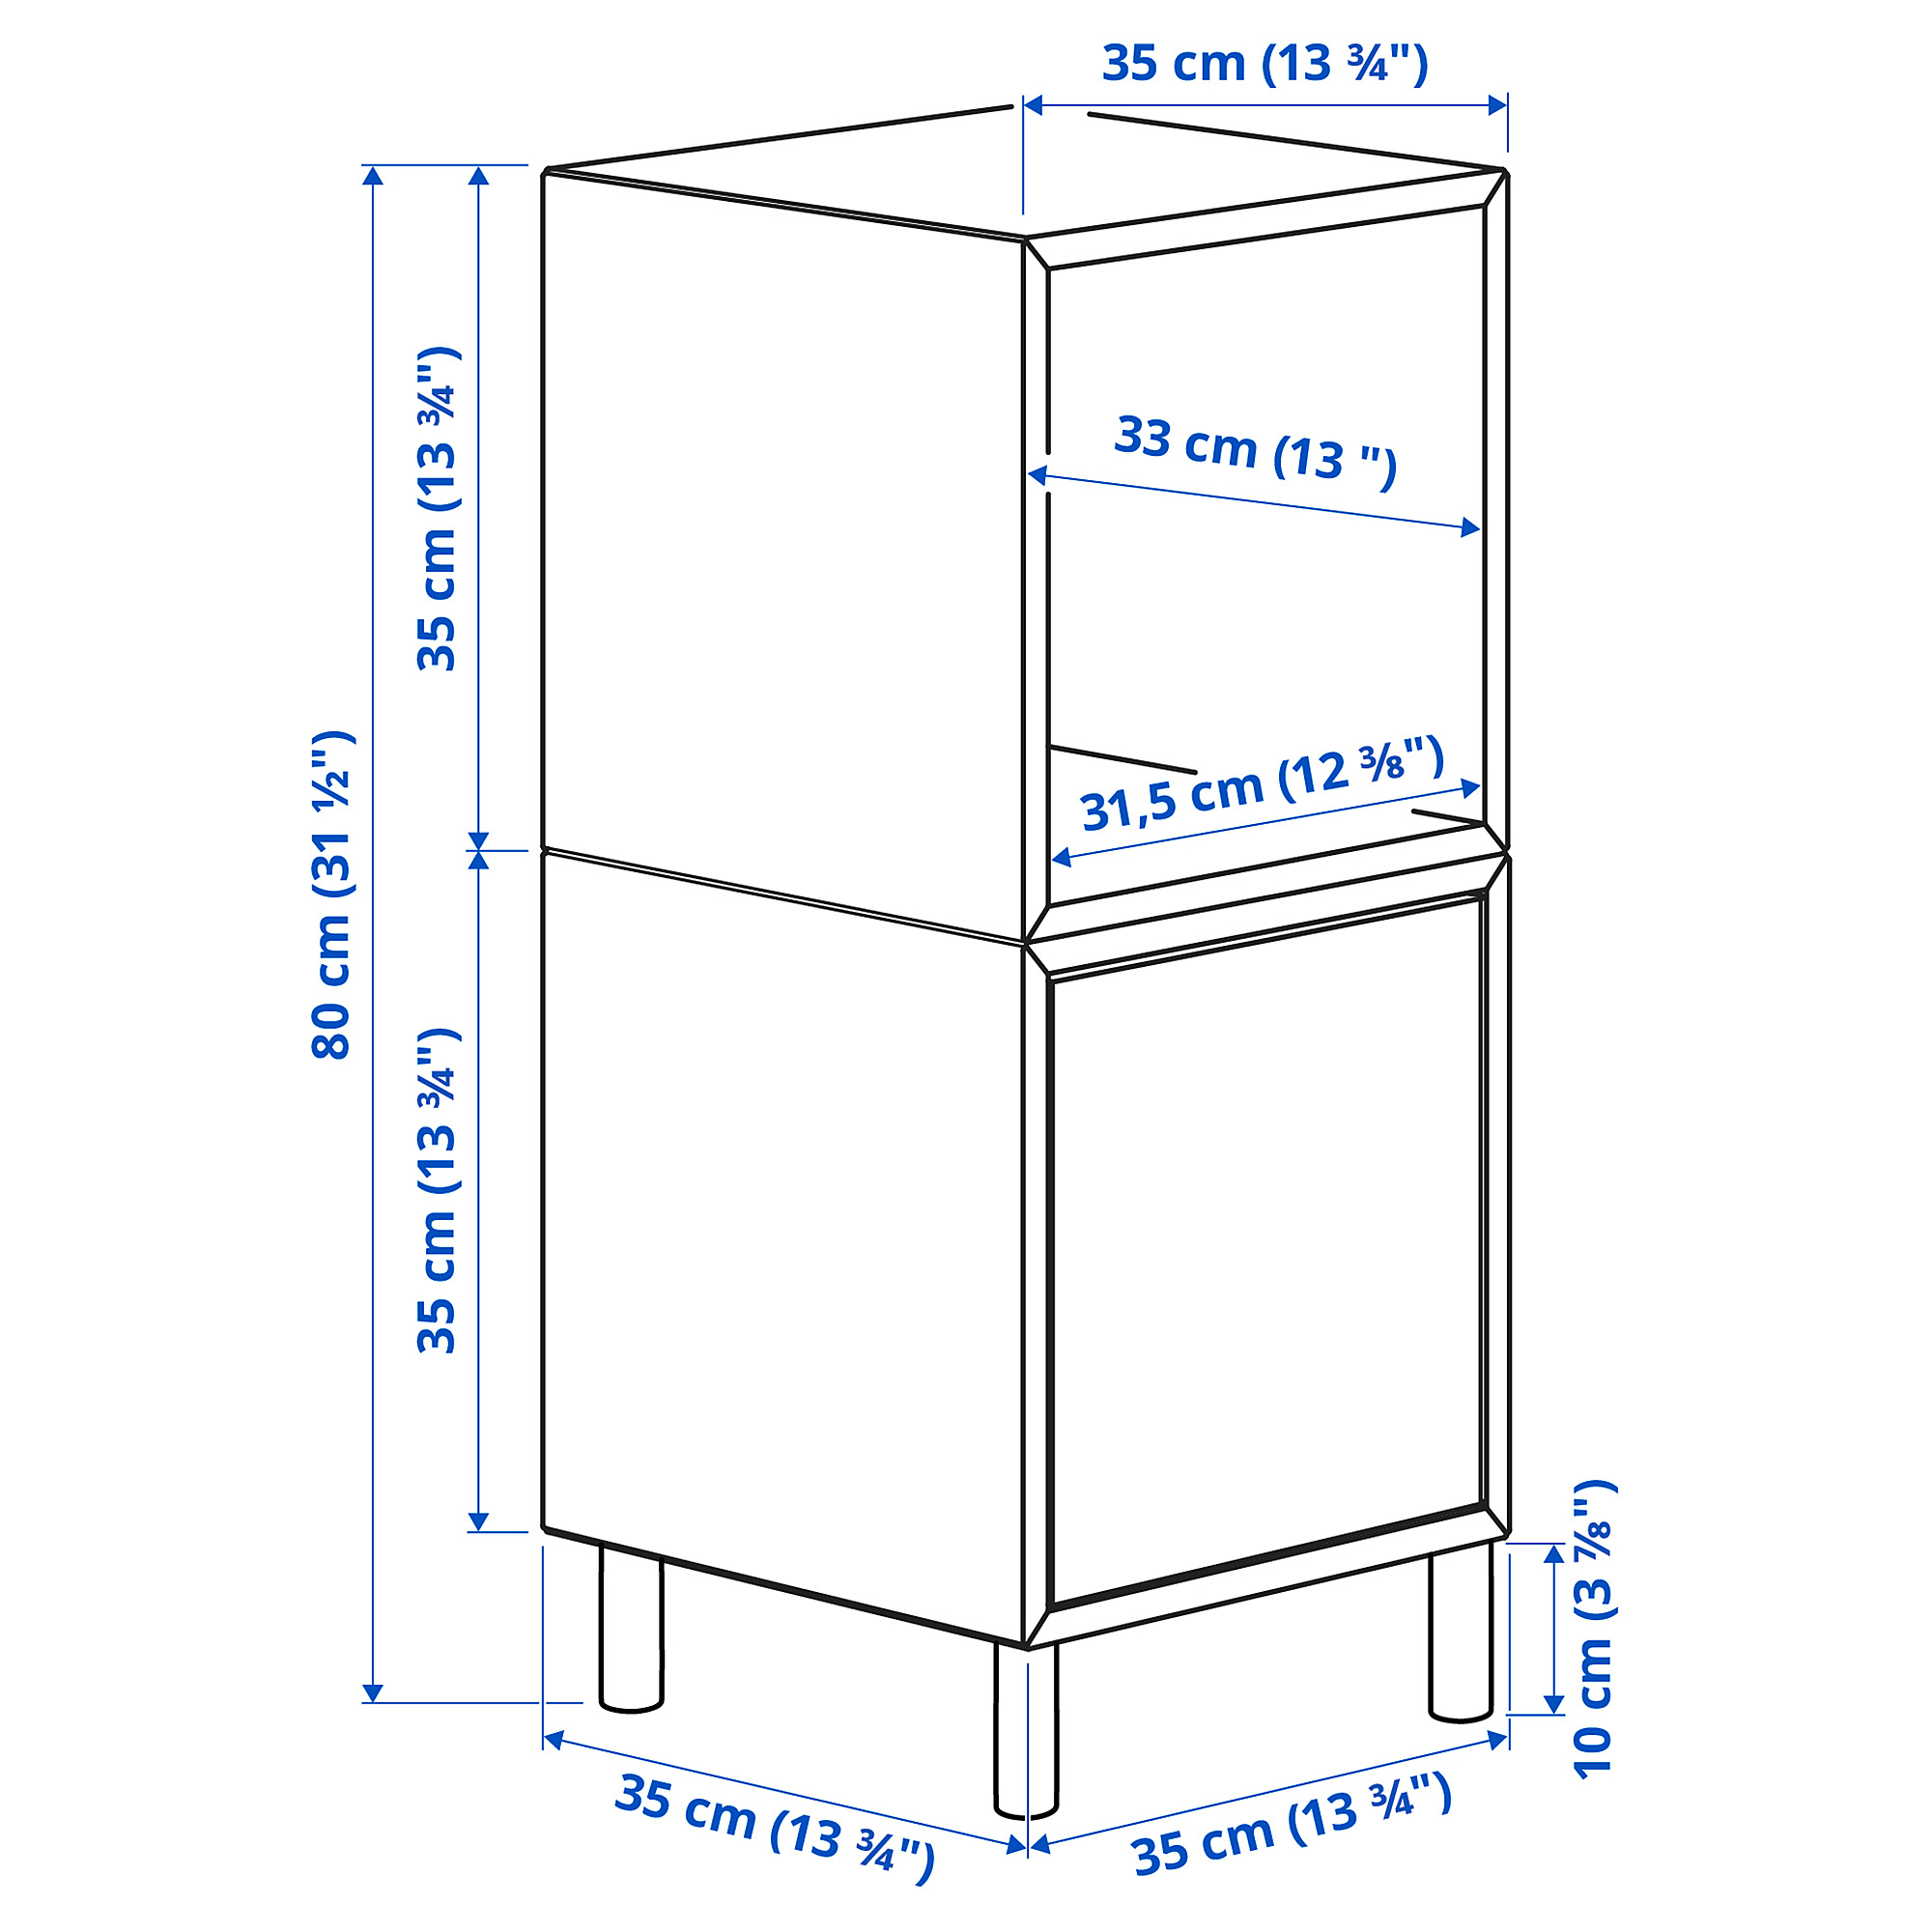 EKET cabinet combination with legs